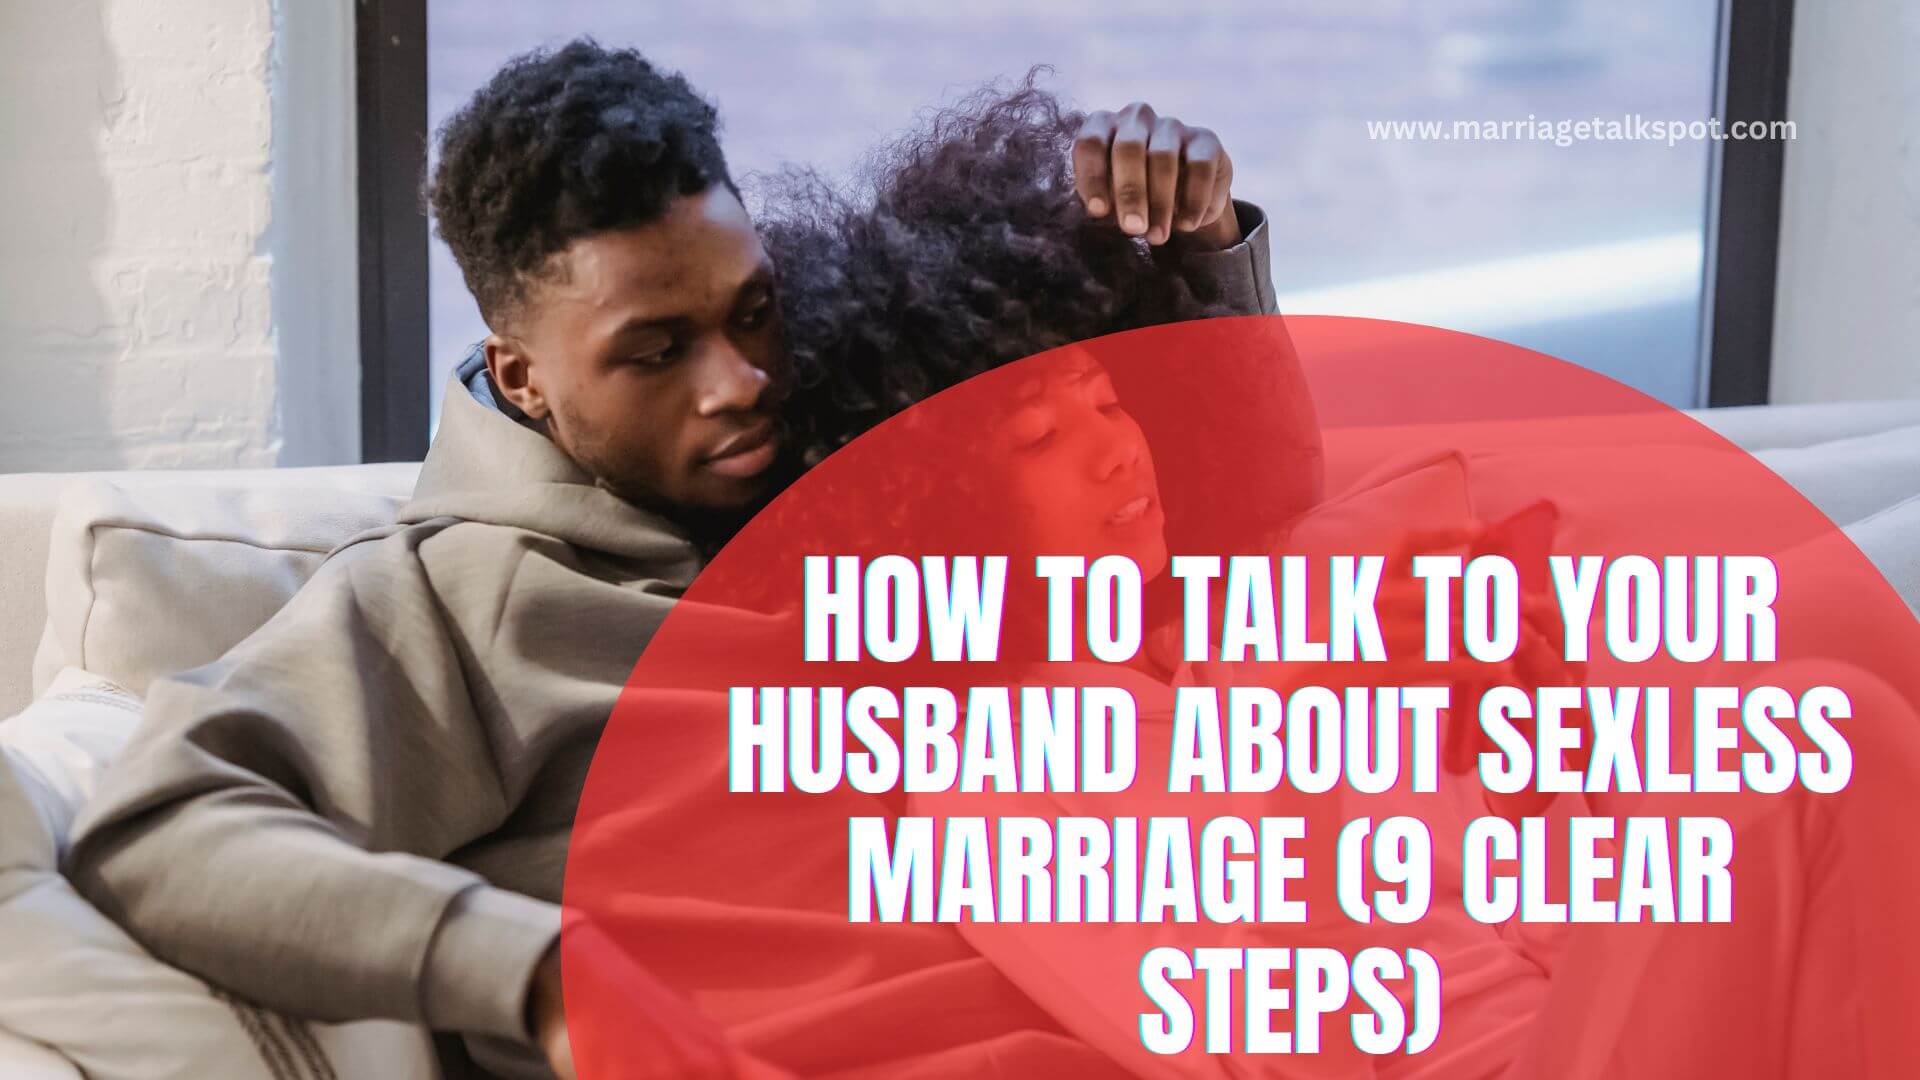 HOW TO TALK TO YOUR HUSBAND ABOUT SEXLESS MARRIAGE (9 CLEAR STEPS)